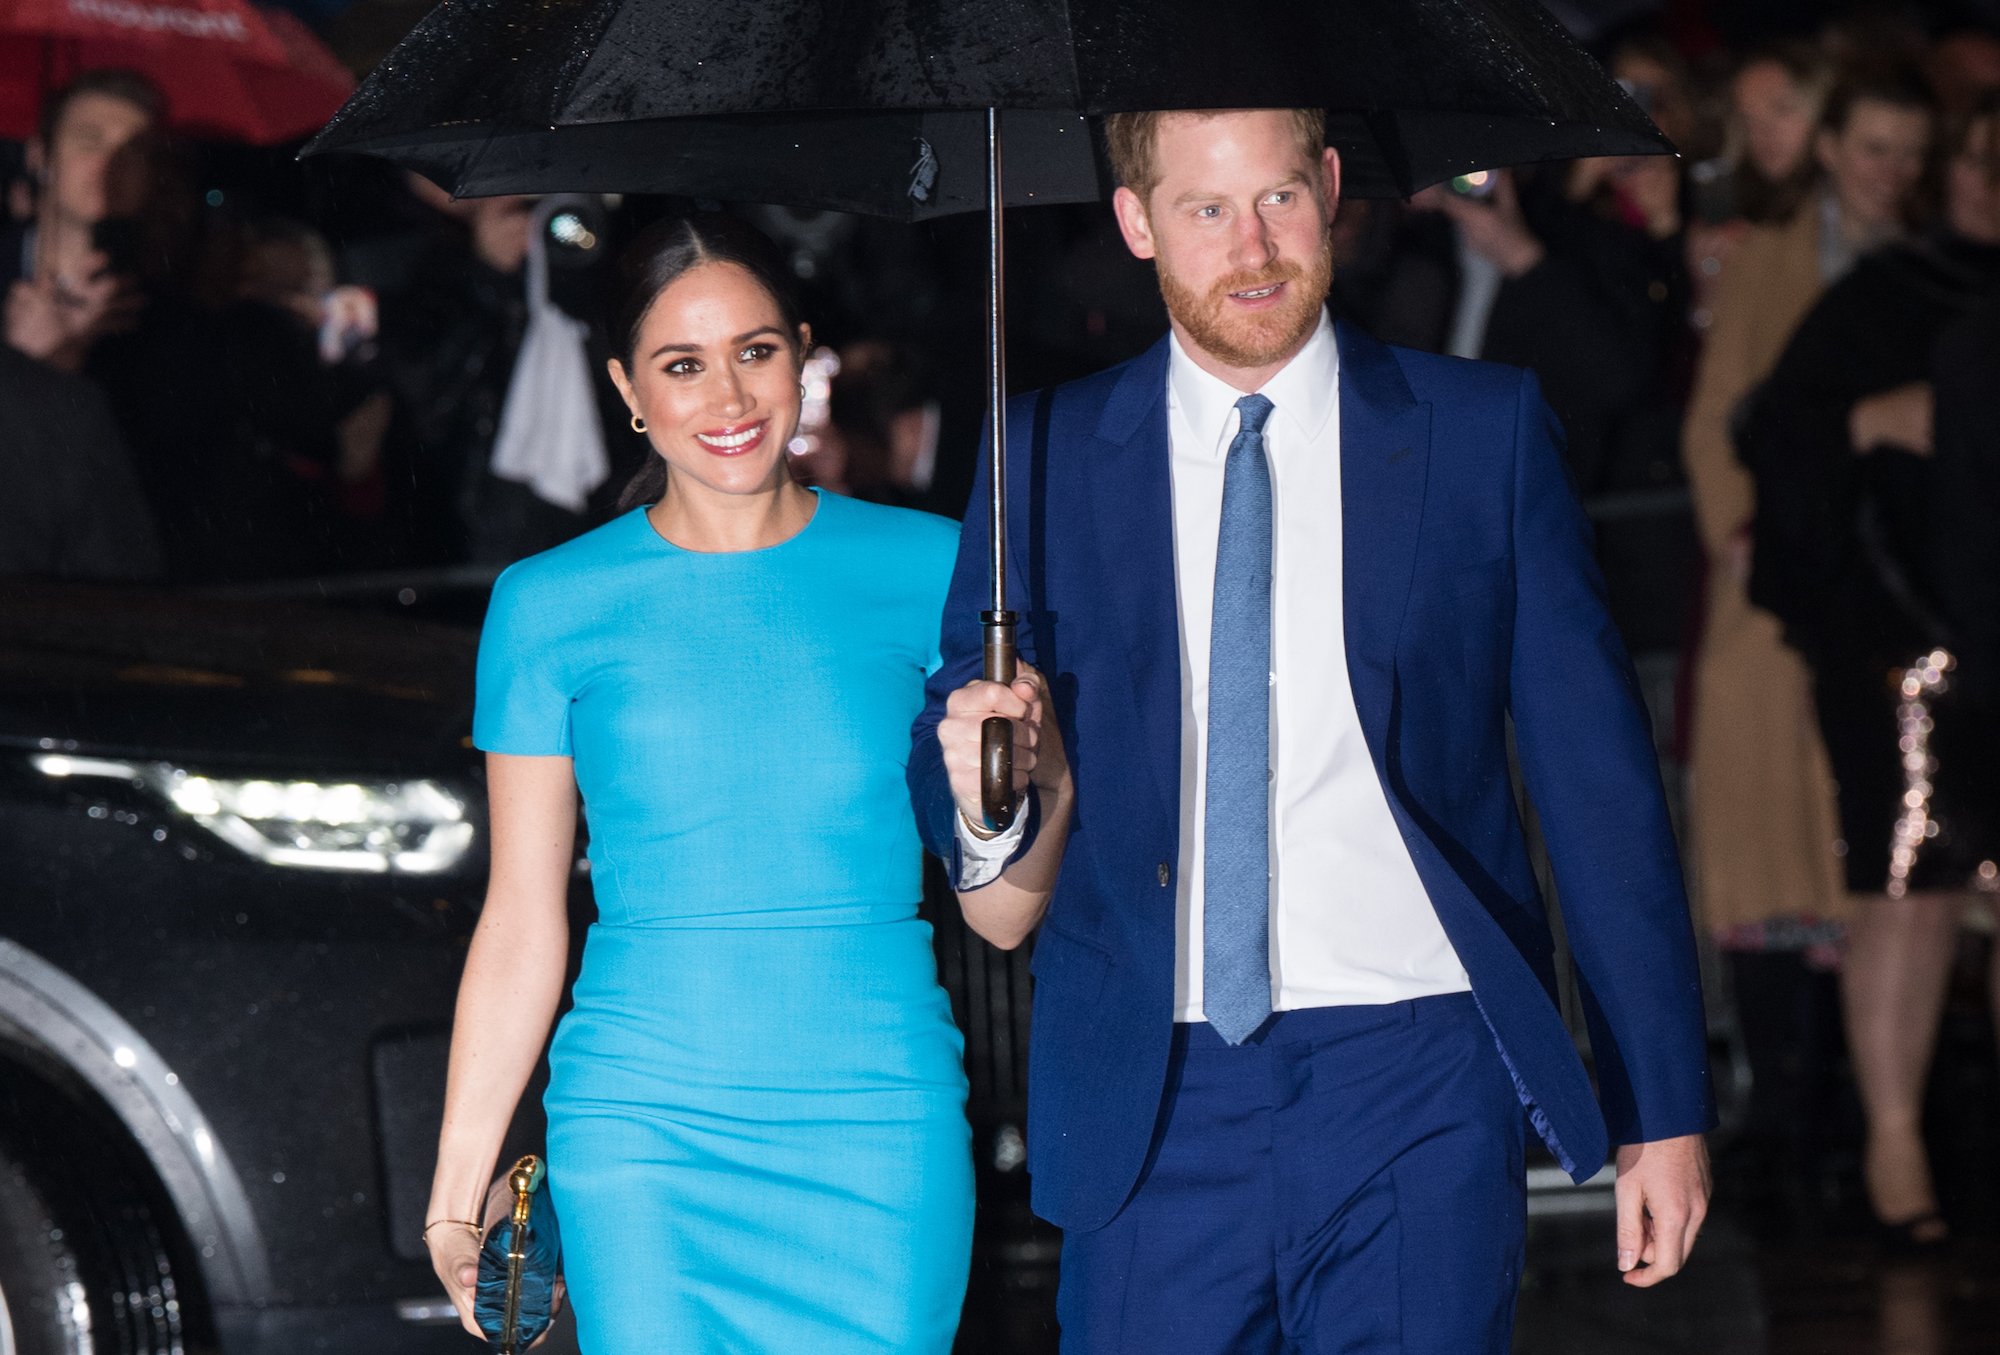 Meghan Markle and Prince Harry smiling, walking under and umbrella